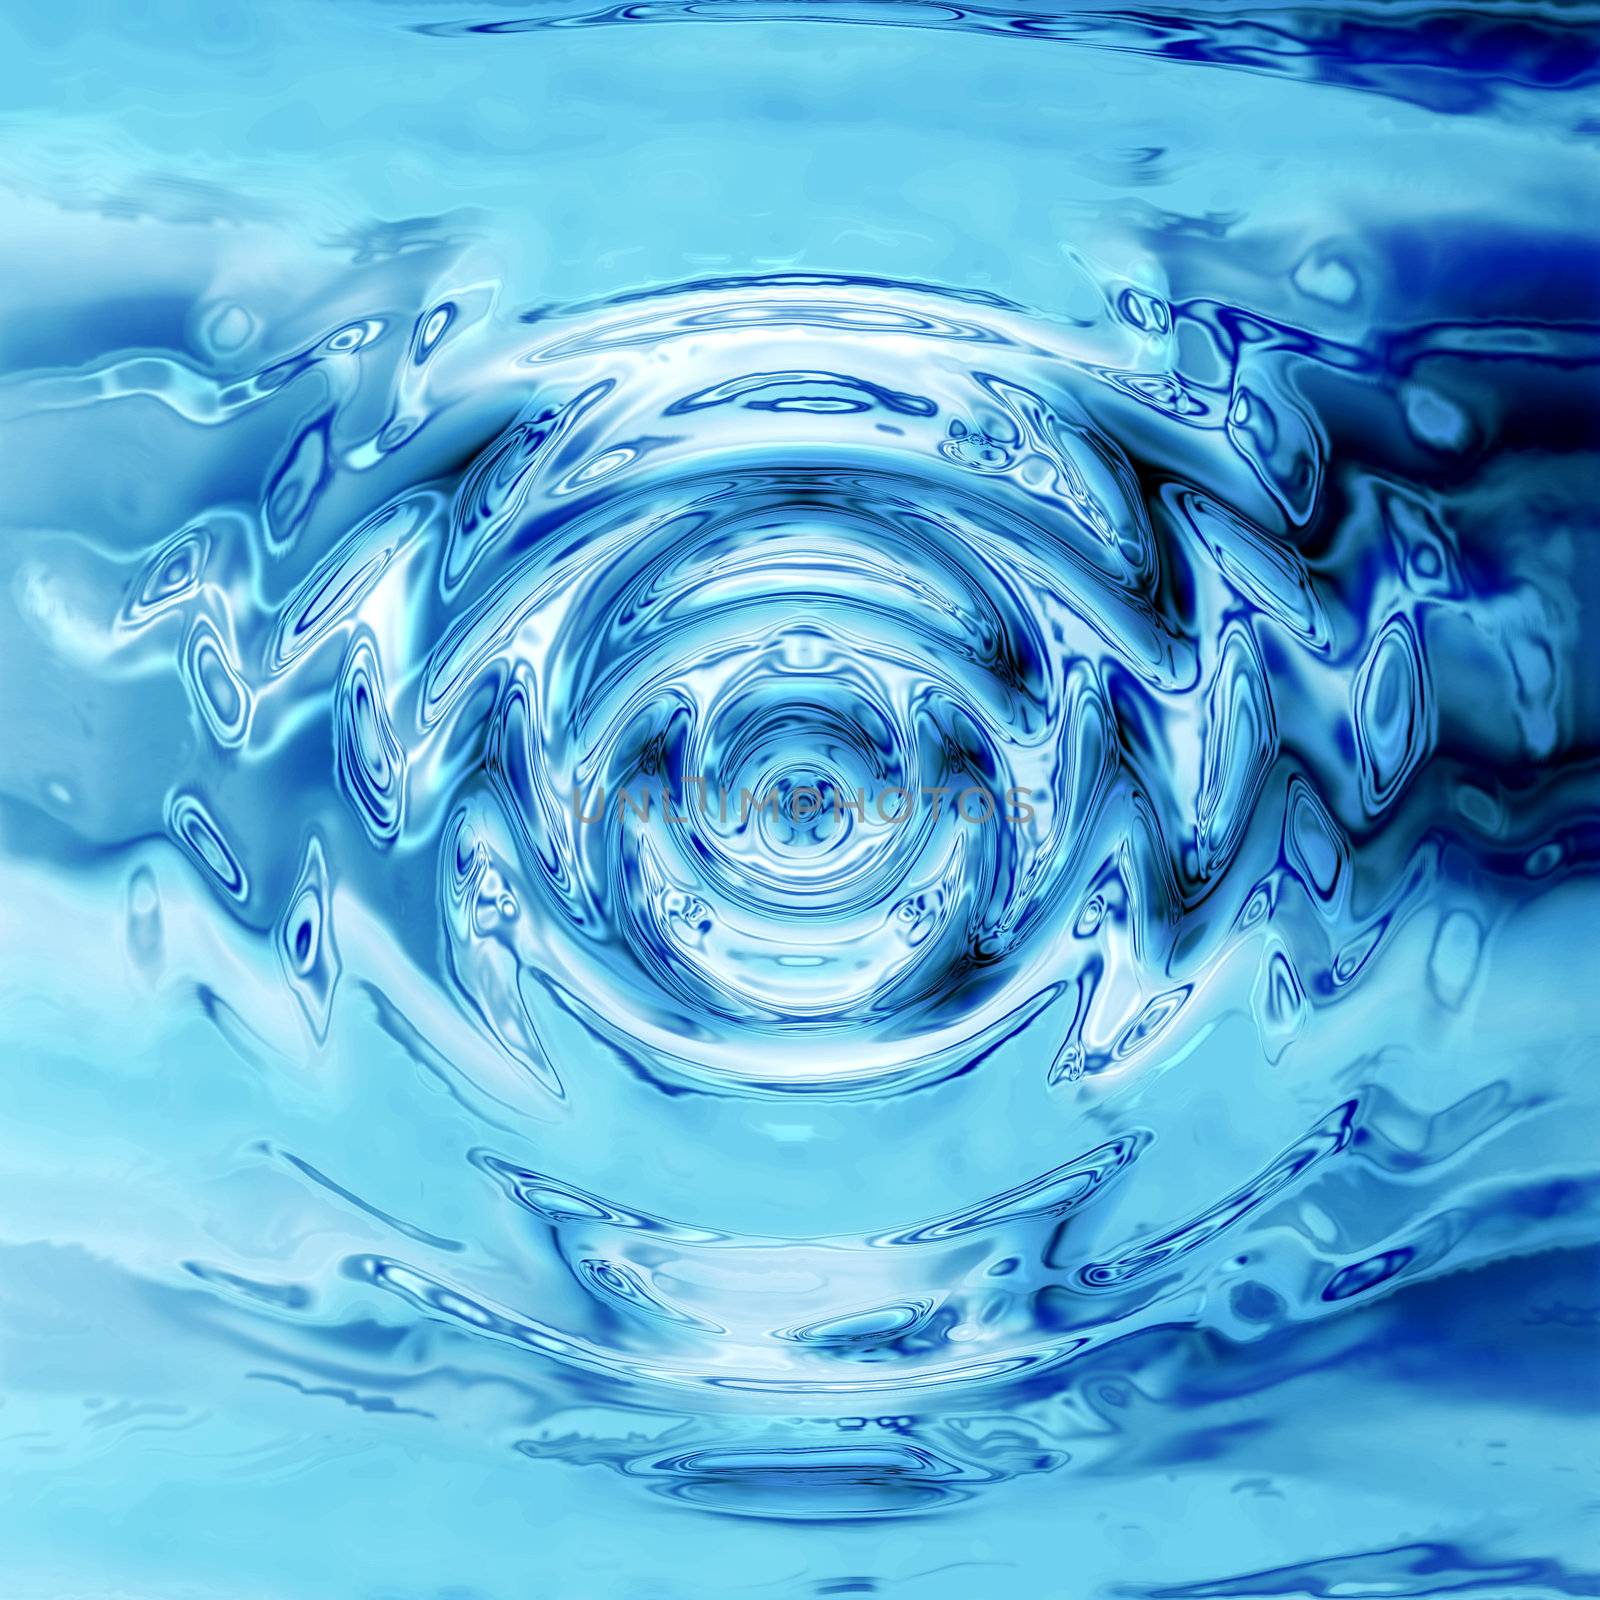 abstract water background generated by the computer